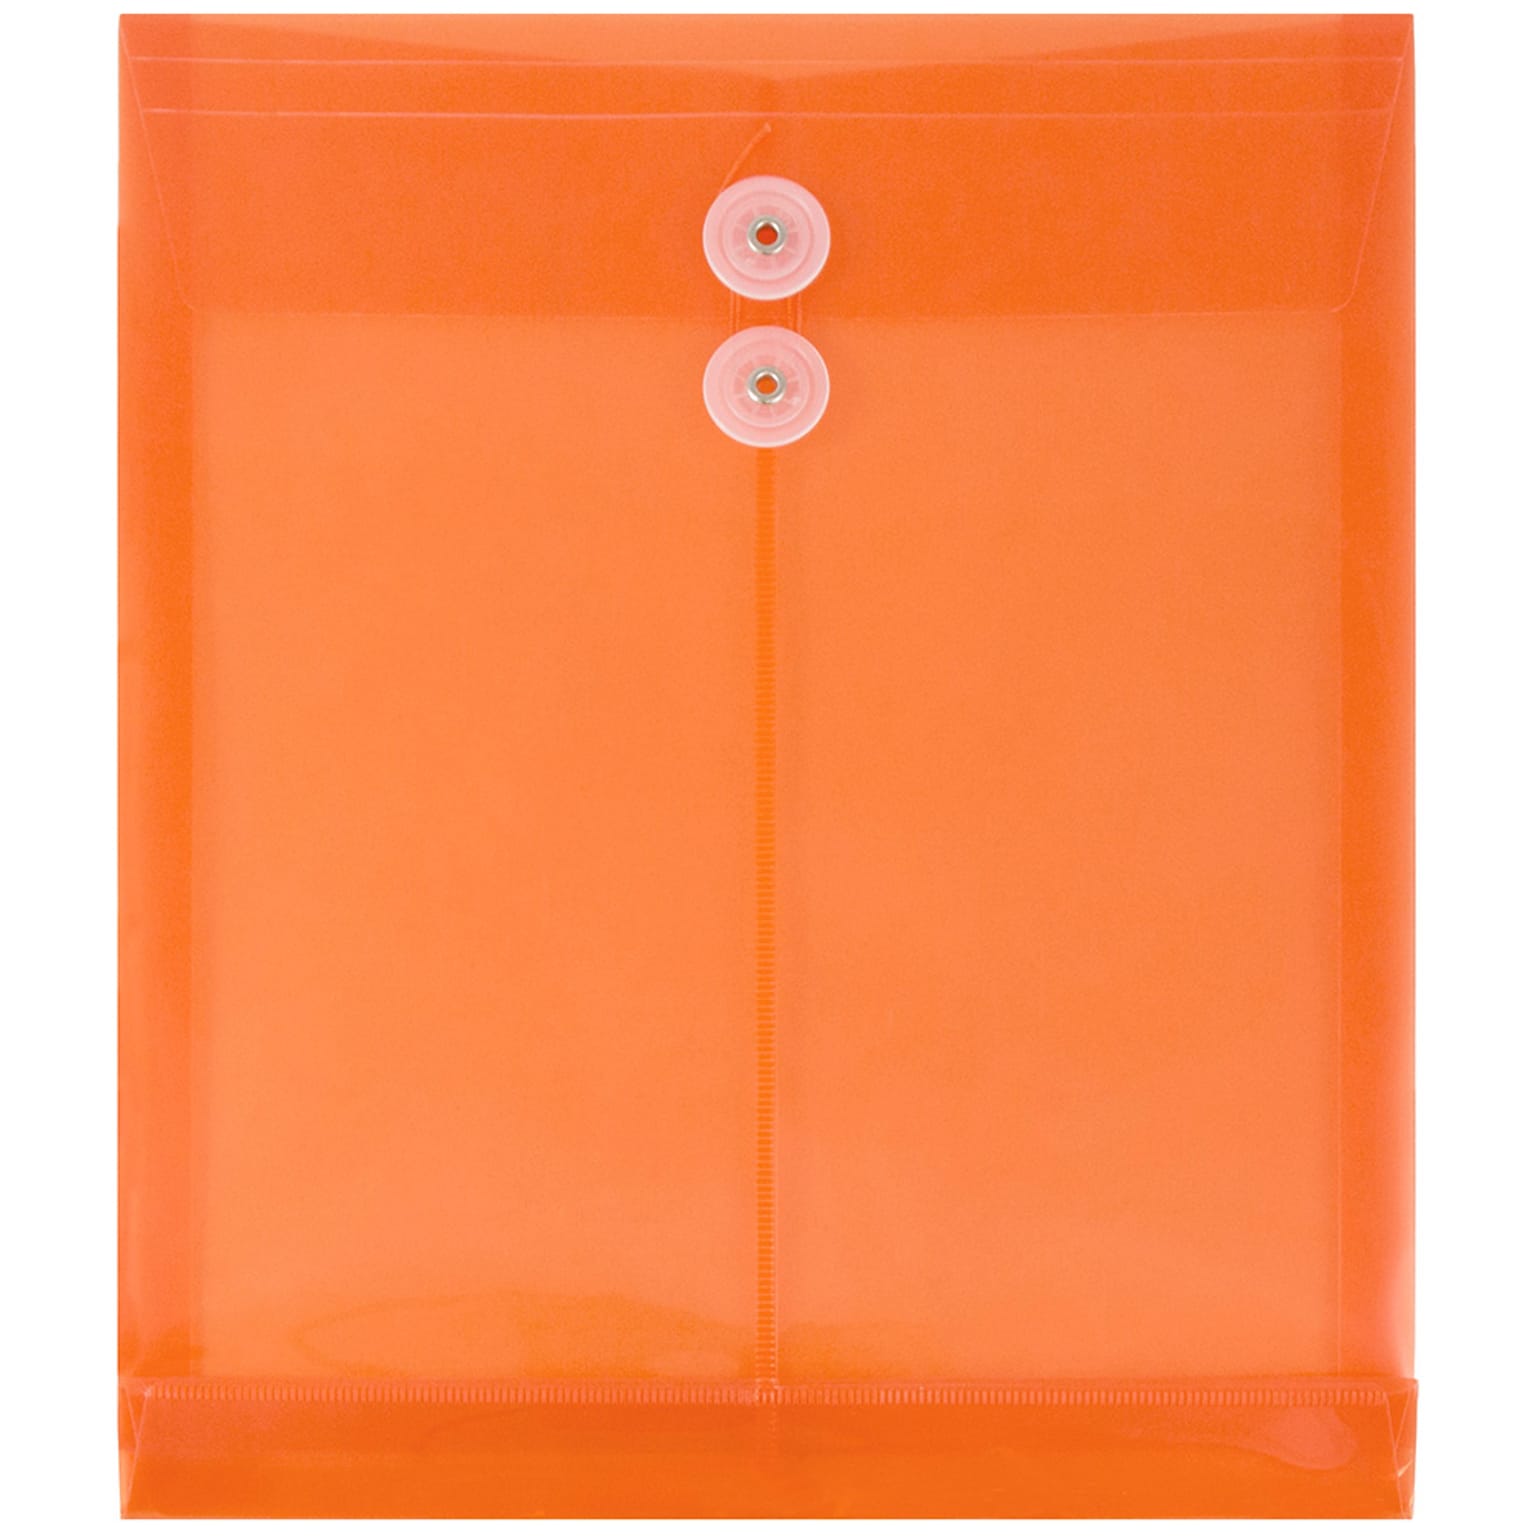 JAM Paper® Plastic Envelopes with Button and String Tie Closure, Letter Open End, 9.75 x 11.75, Bright Orange, 12/Pack (1221560)